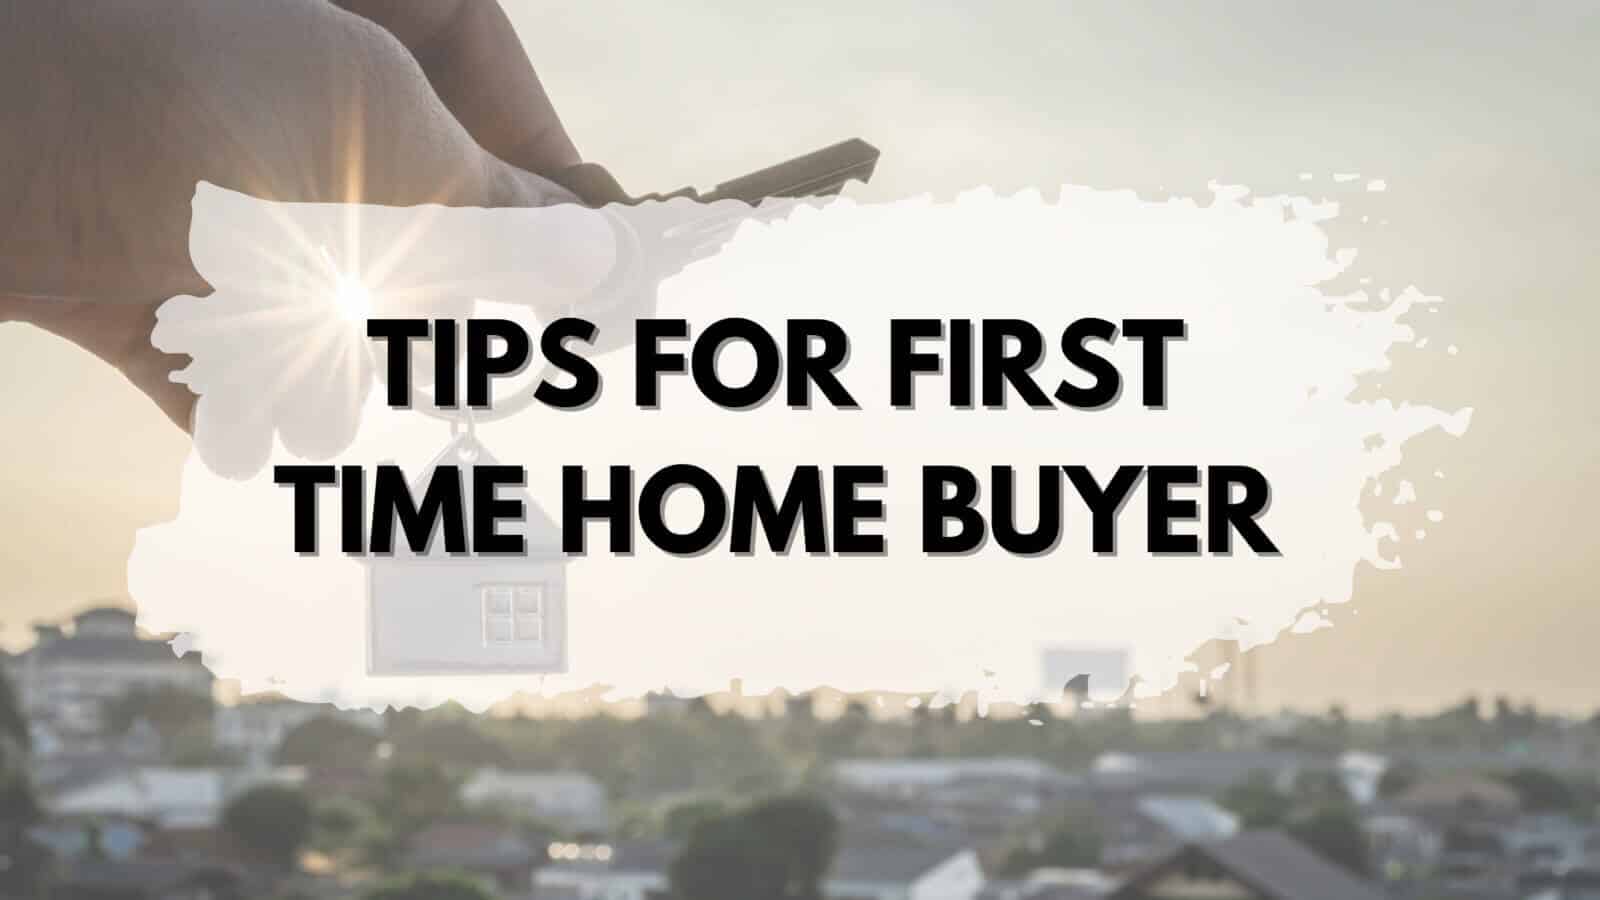 Home buying tips for first timers.